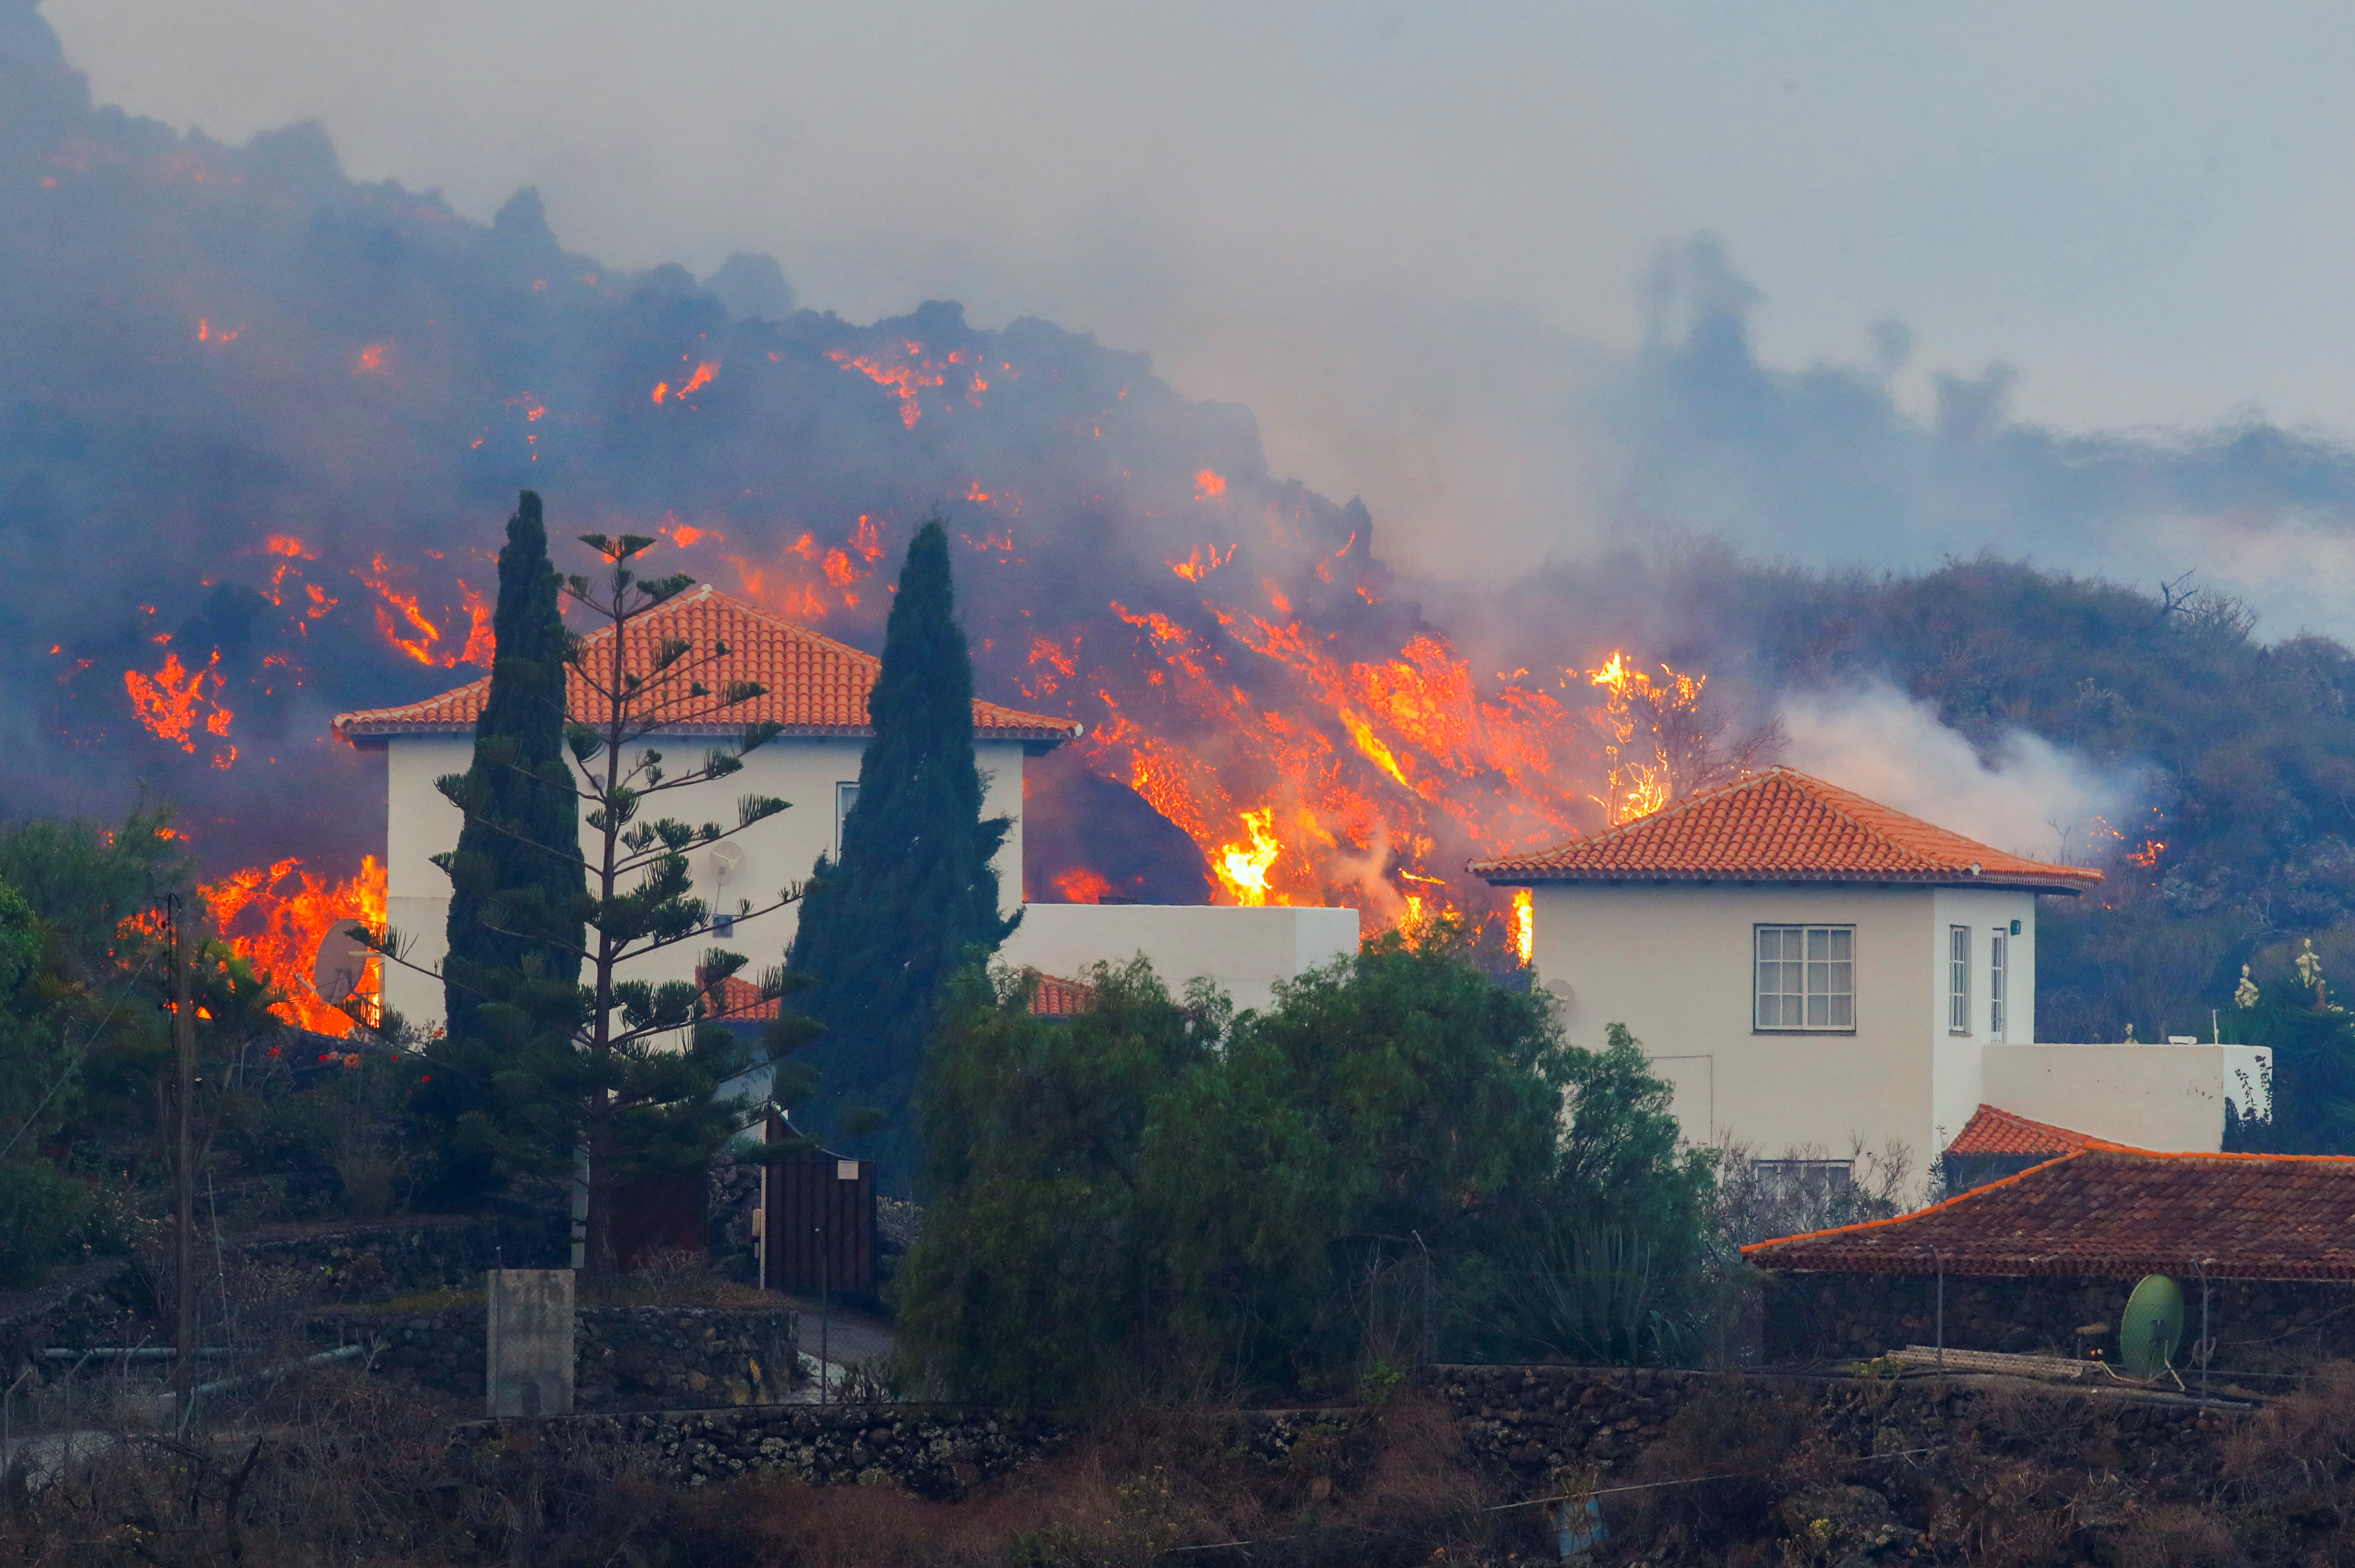 Lava flows behind a house following the eruption of a volcano in Spain